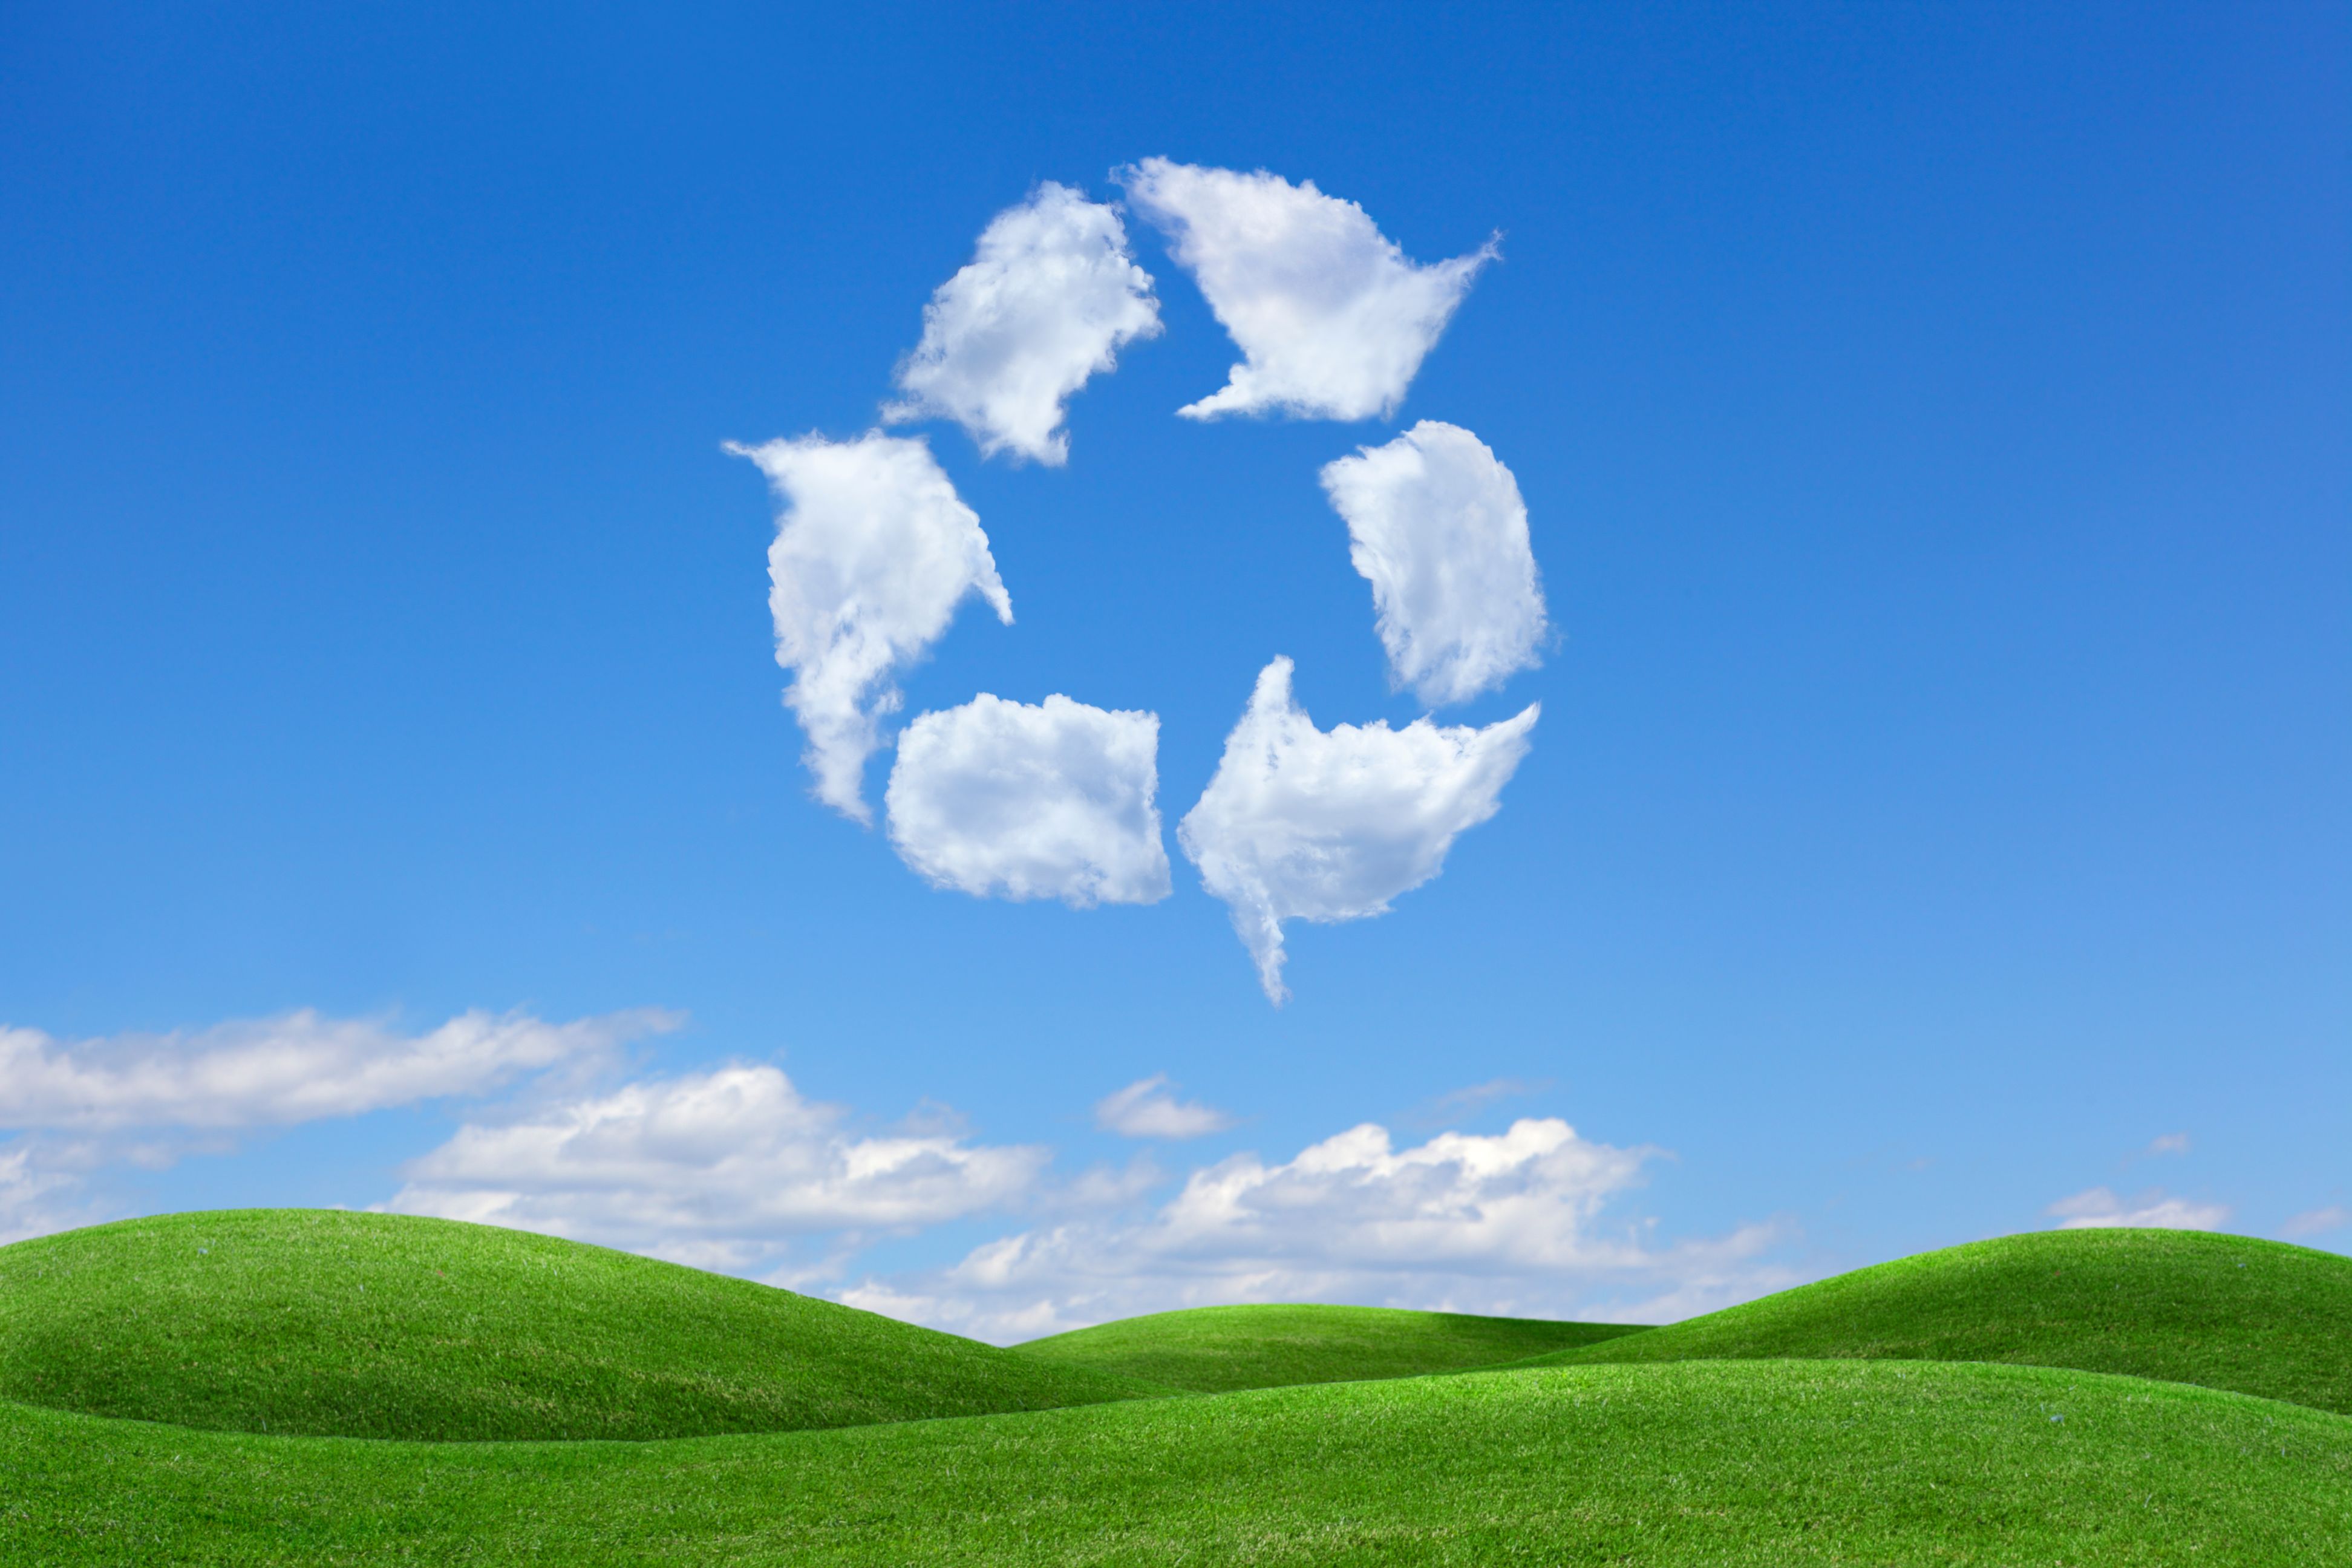 Recycling symbol looking like clouds, in the blue sky with green grass below.